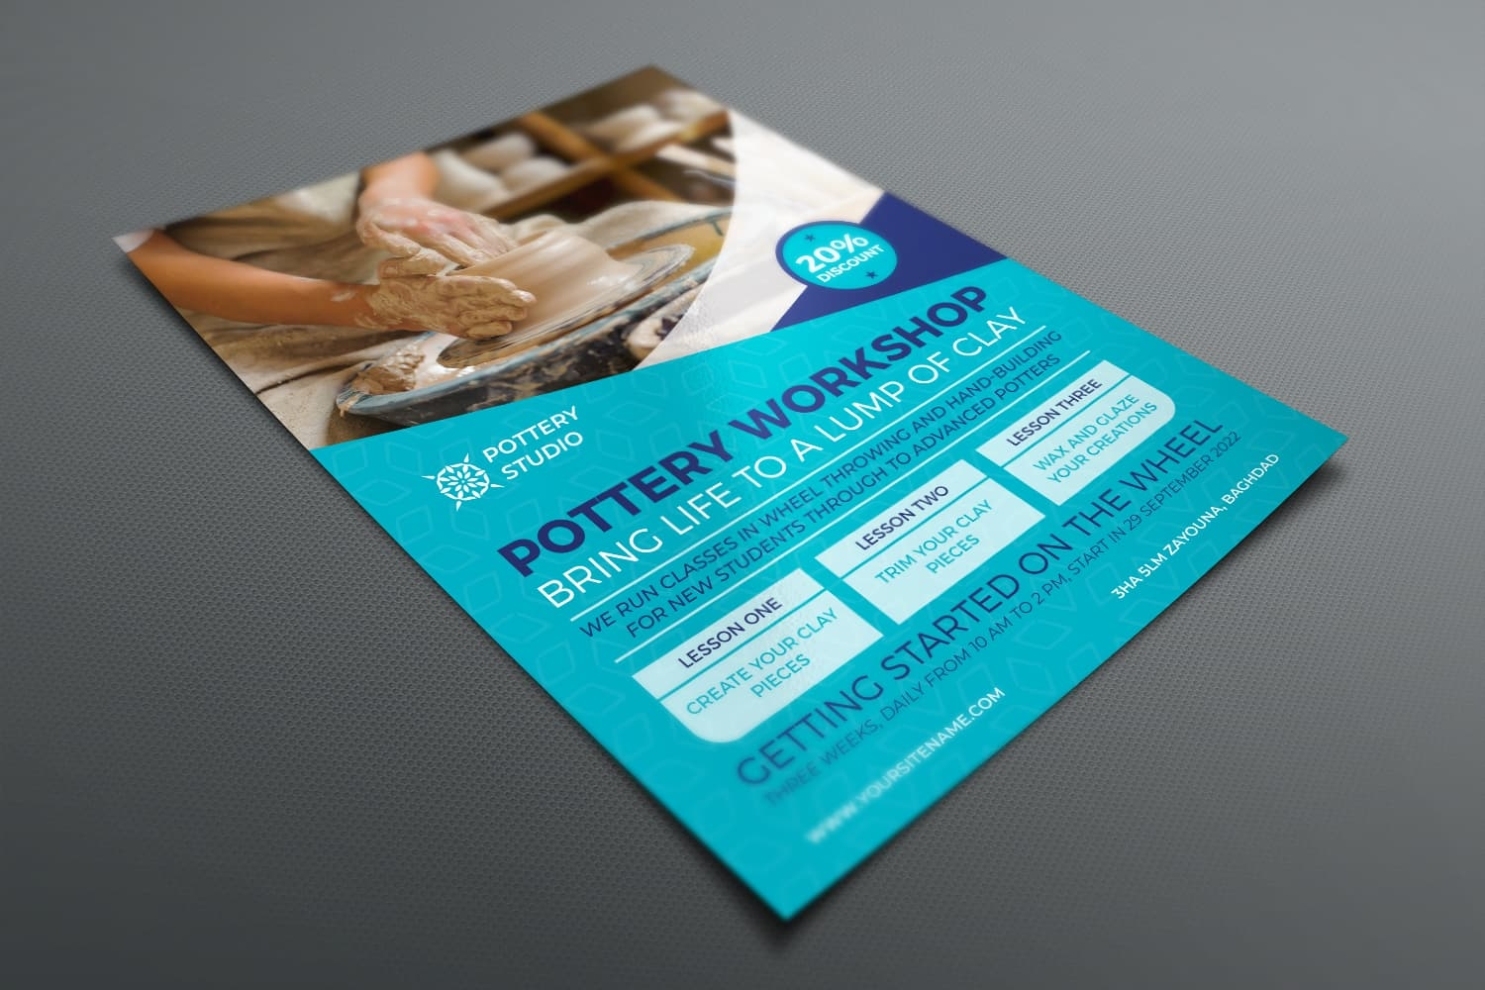 Pottery Workshop Flyer Template | Worth To Buy With Regard To Workshop Flyer Template